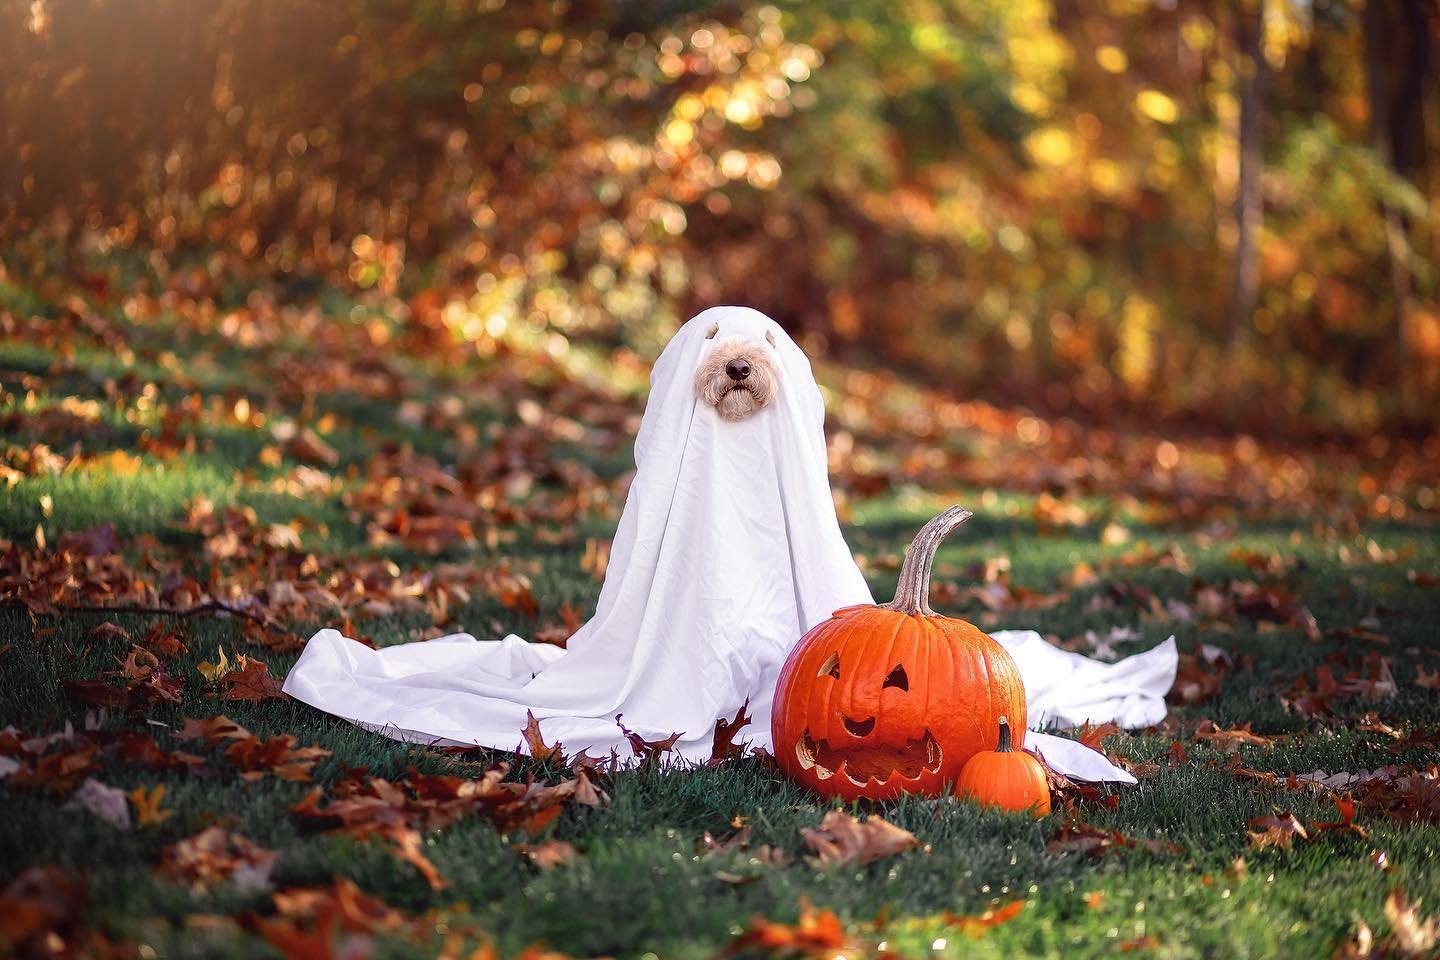 If you don't believe in ghosts, how do you explain this? 
.
#finneganbarley #ghost #halloween #costume #ghosttrend #ghostdog #spooky #pumpkin #dogcostume